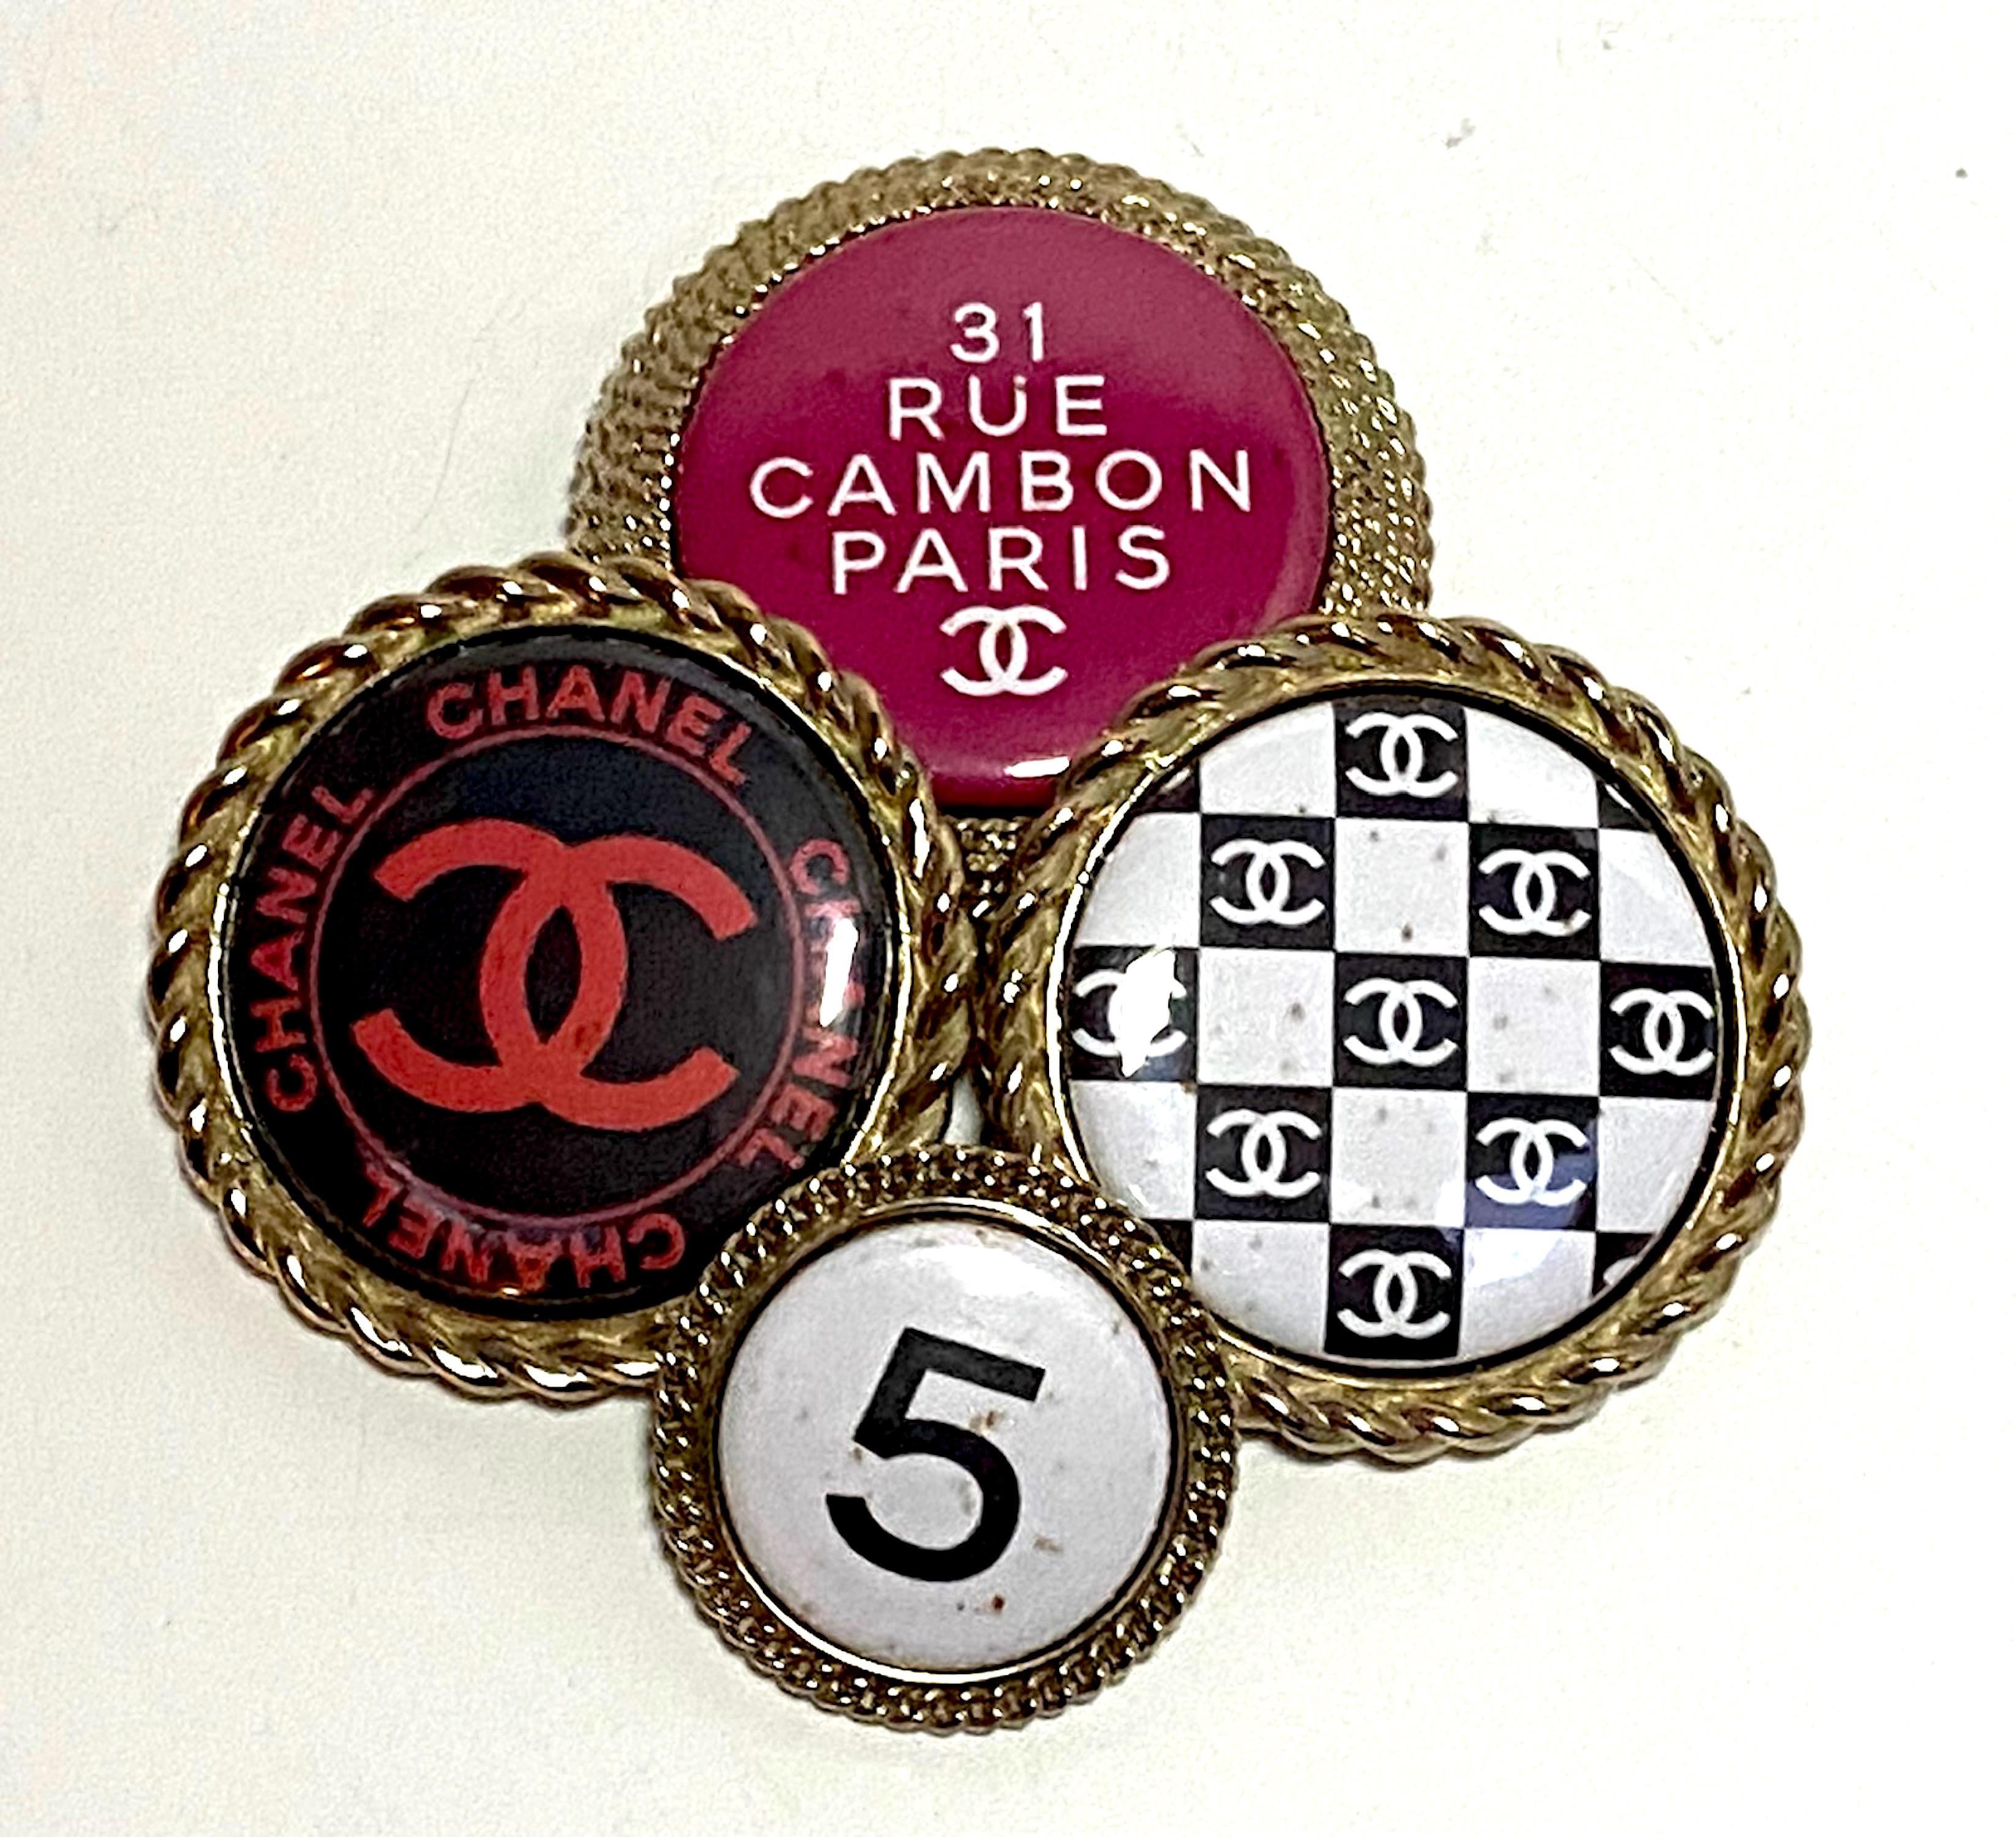 From the Spring 2008 collection is this unique fold tone Chanel brooch of four large buttons. The buttons are 1.25, 1.75 and 2 inches in diameter. Each is gold plated with a rope design border and set with a laminated graphic disk with Iconic Chanel